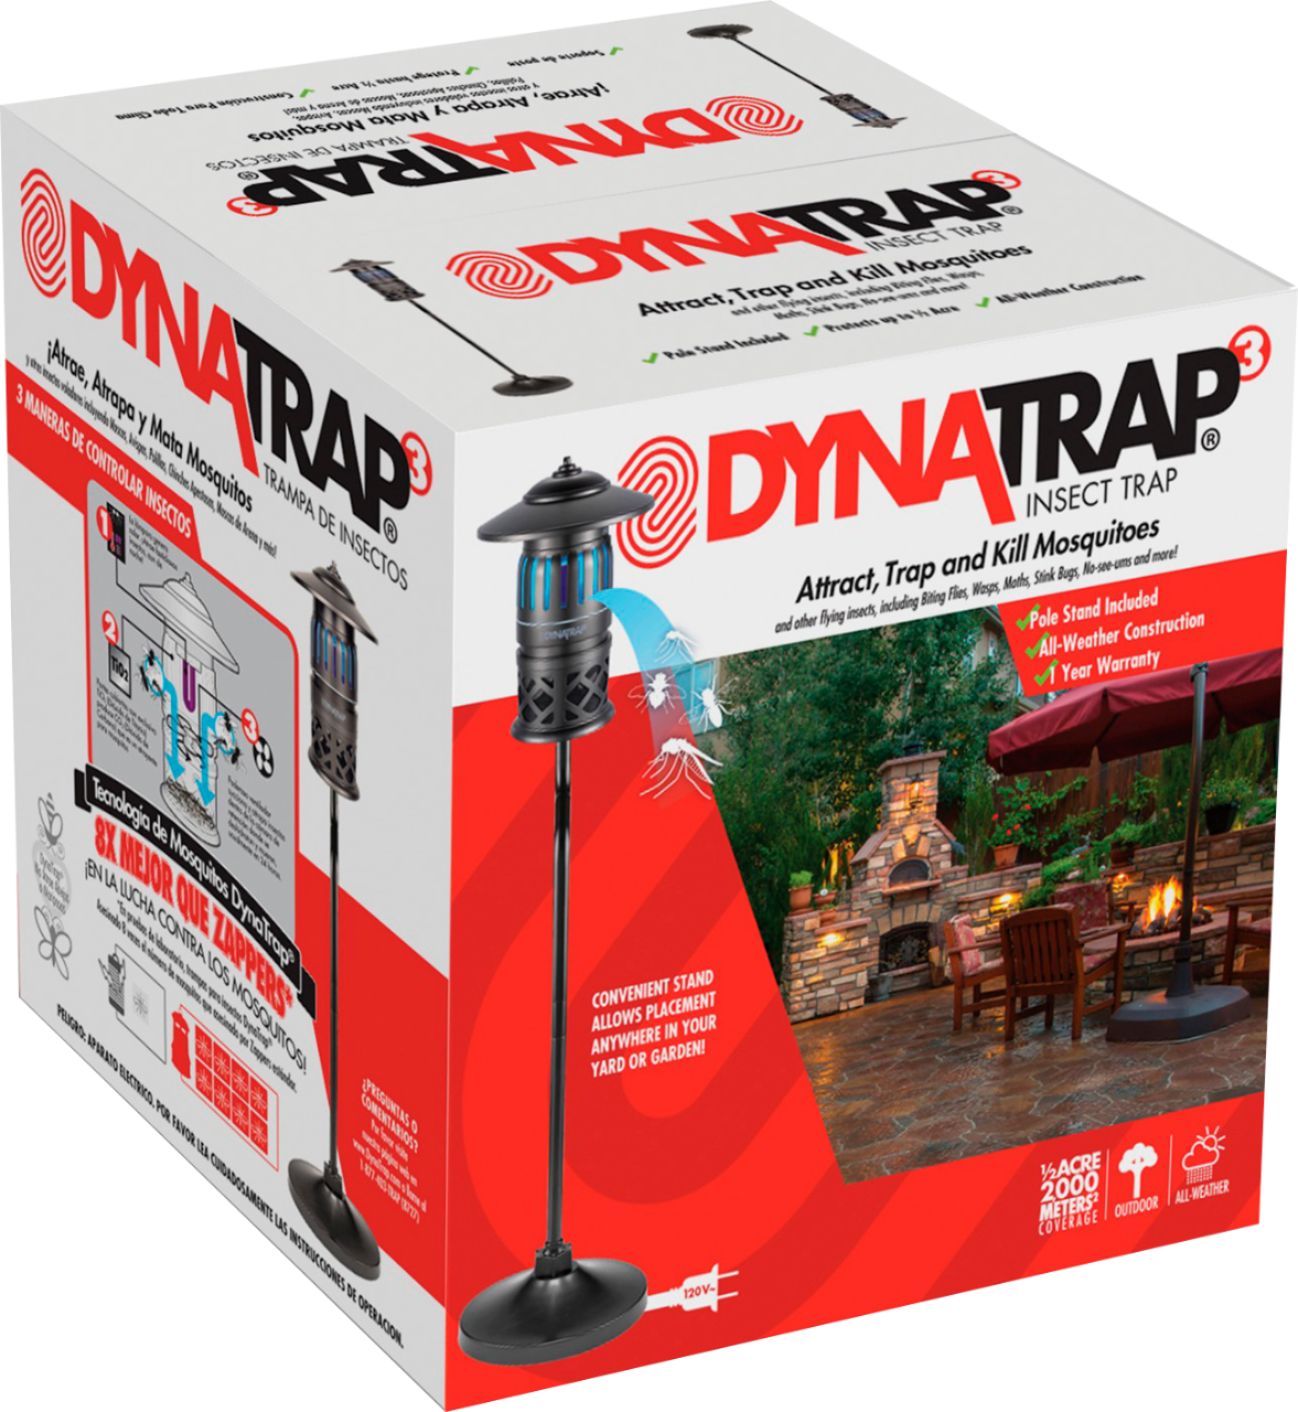 DynaTrap® 1 Acre Mosquito & Insect Kit